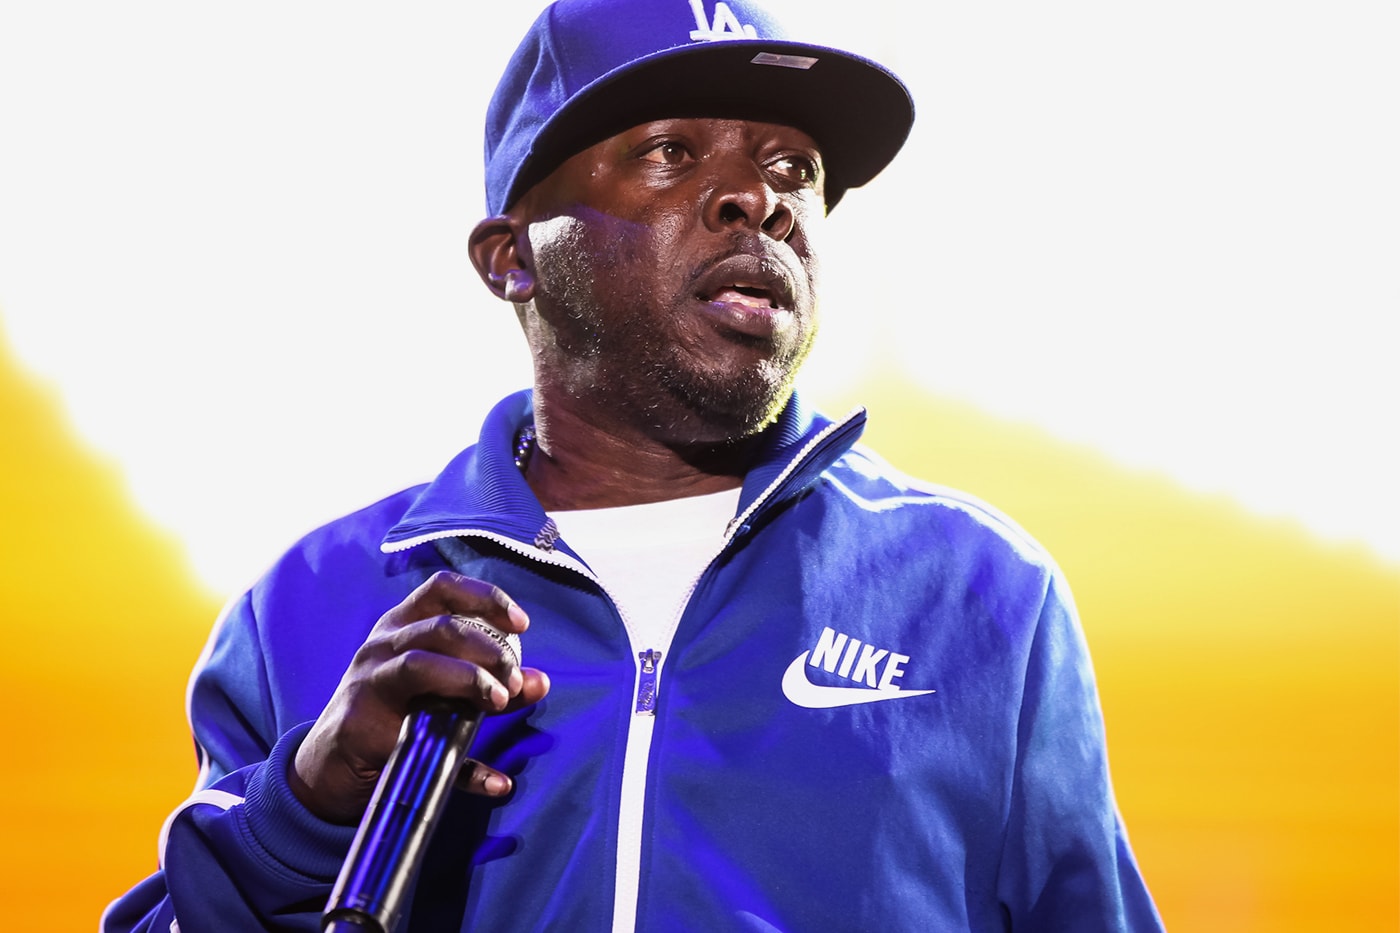 a tribe called quest Phife Dawg Posthumous Album News thank you for your service we'll take it from here five foot assassin 